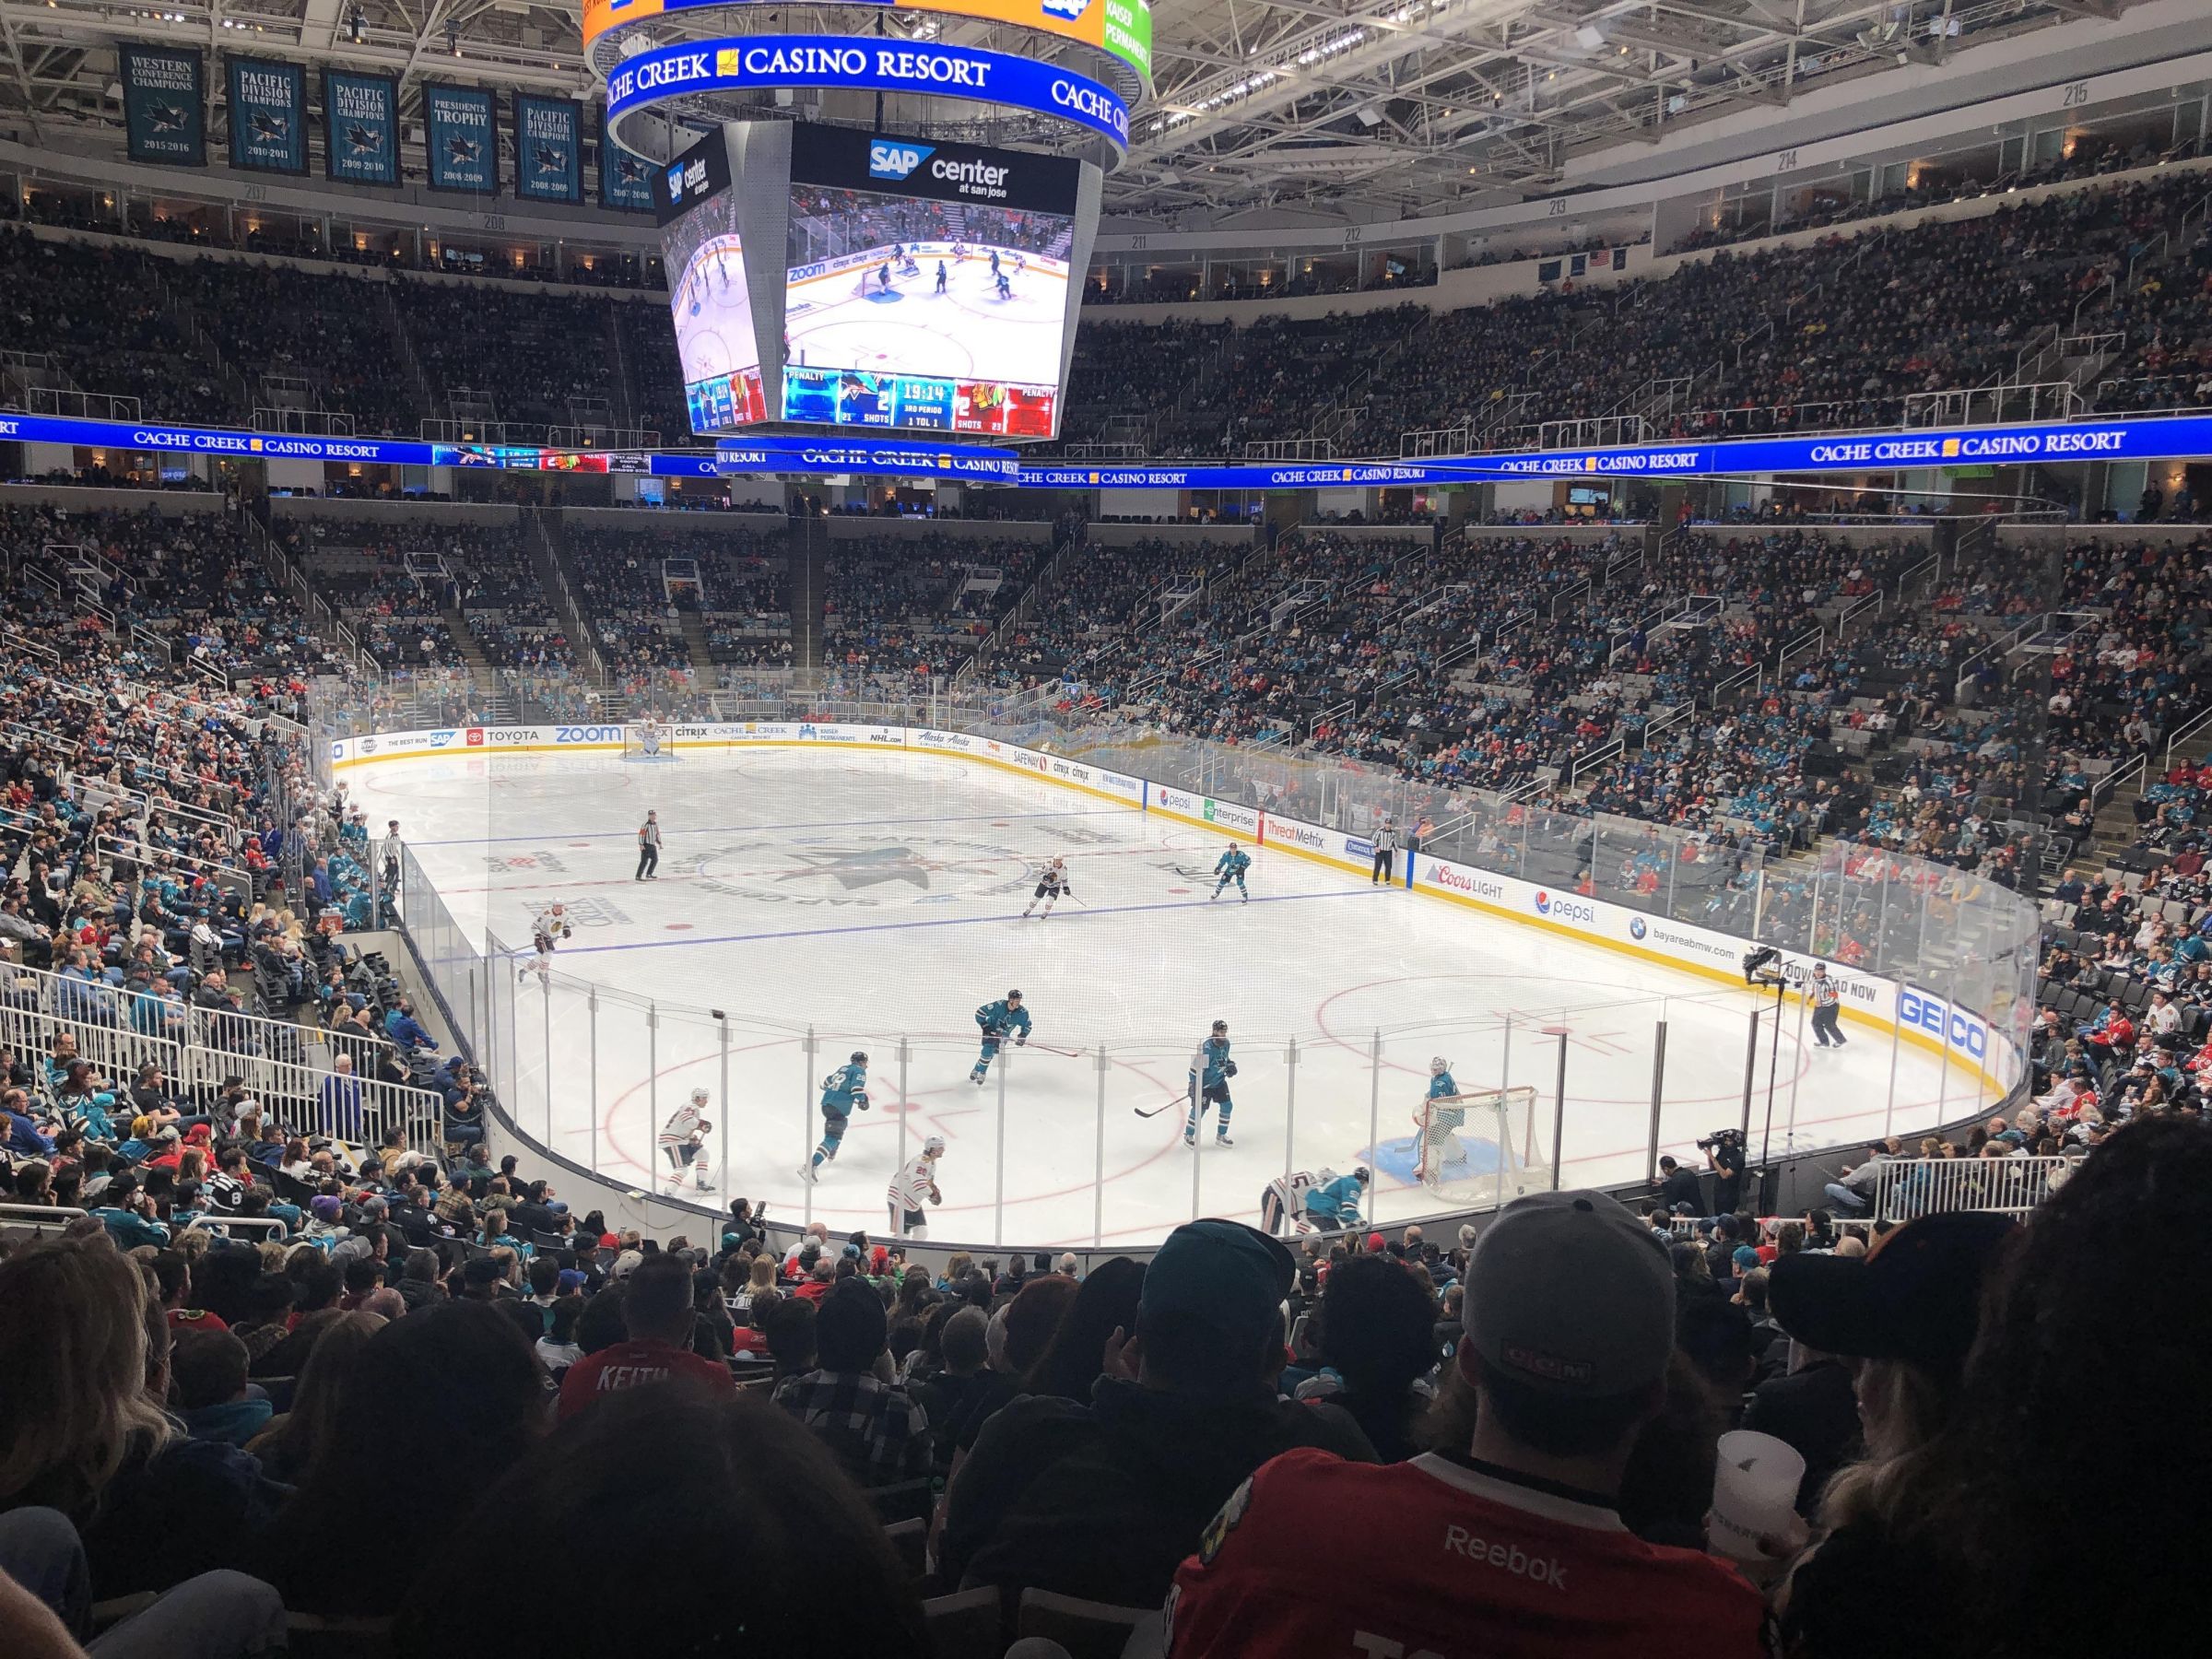 section 124, row 23 seat view  for hockey - sap center